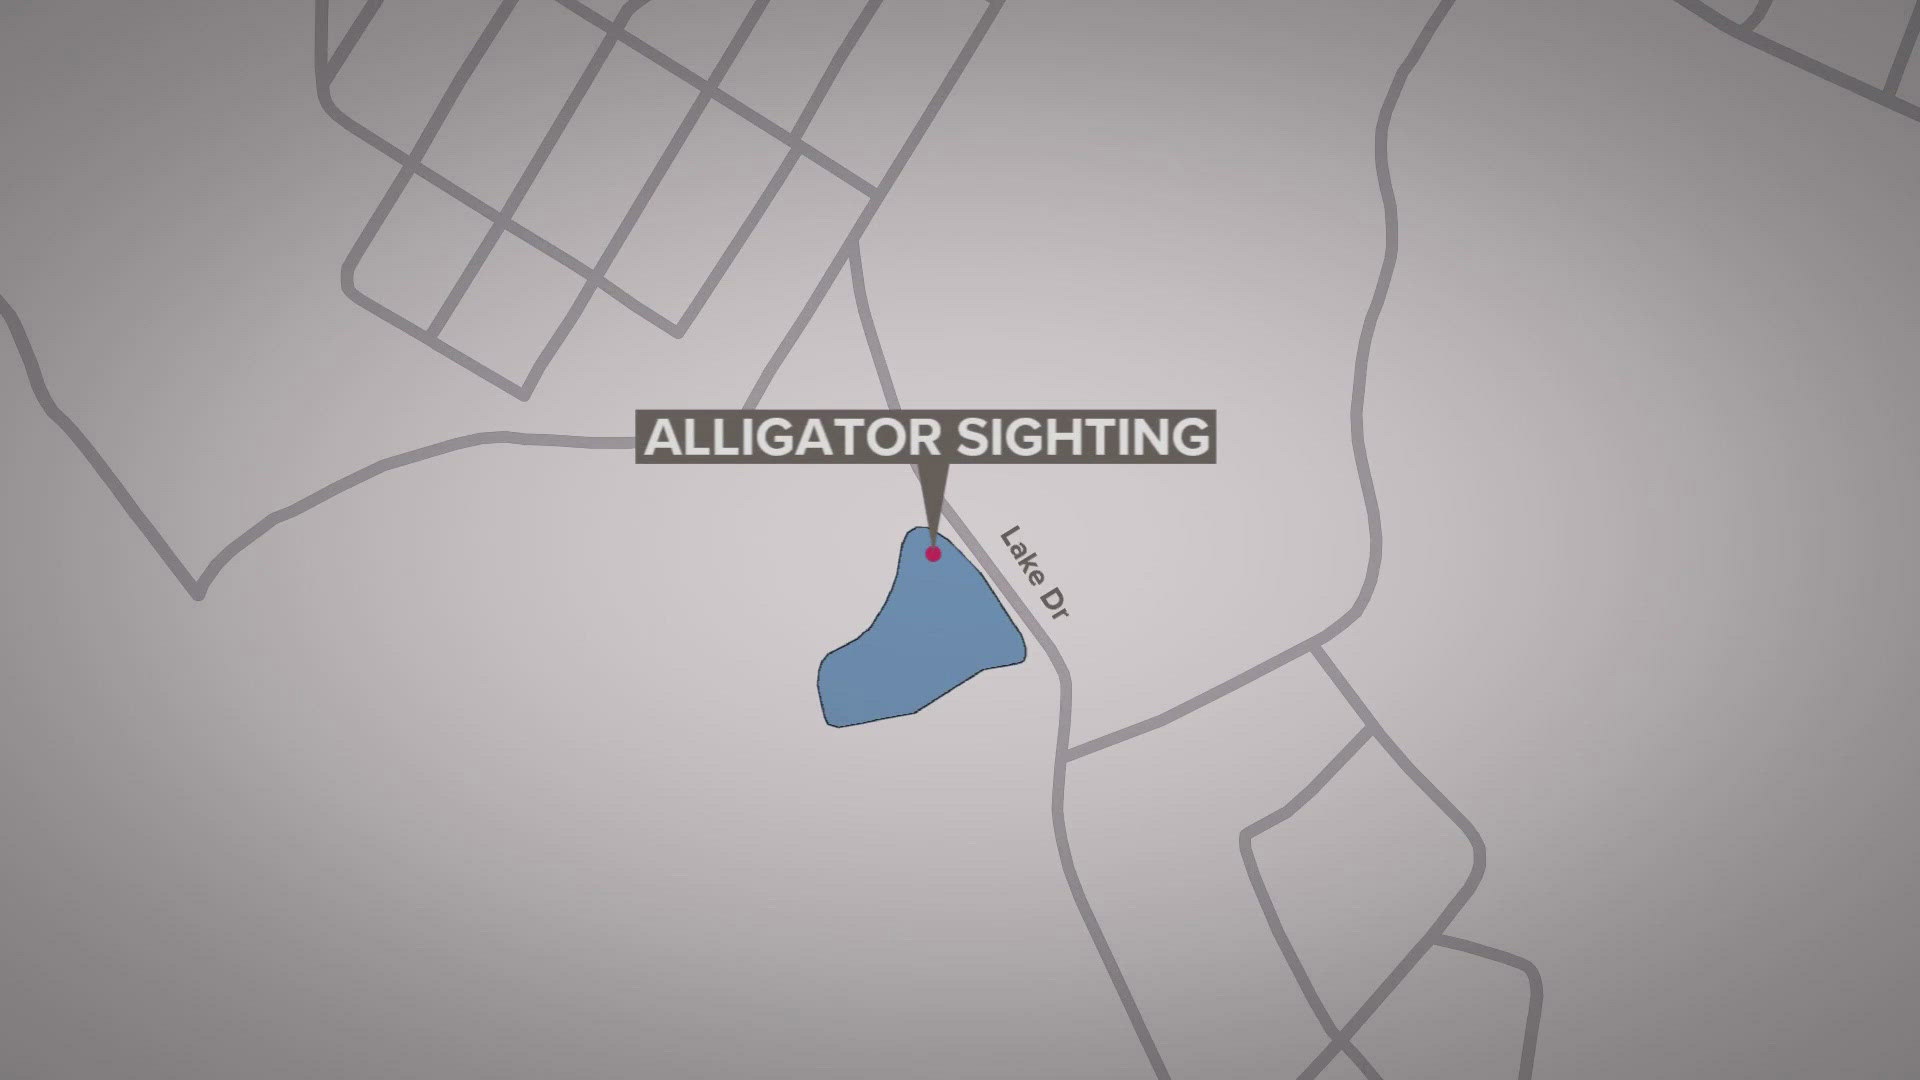 Police are alerting the public about a small alligator being spotted in Bonne Terre Lake. Police said the alligator was 20 inches in length and non-aggressive.